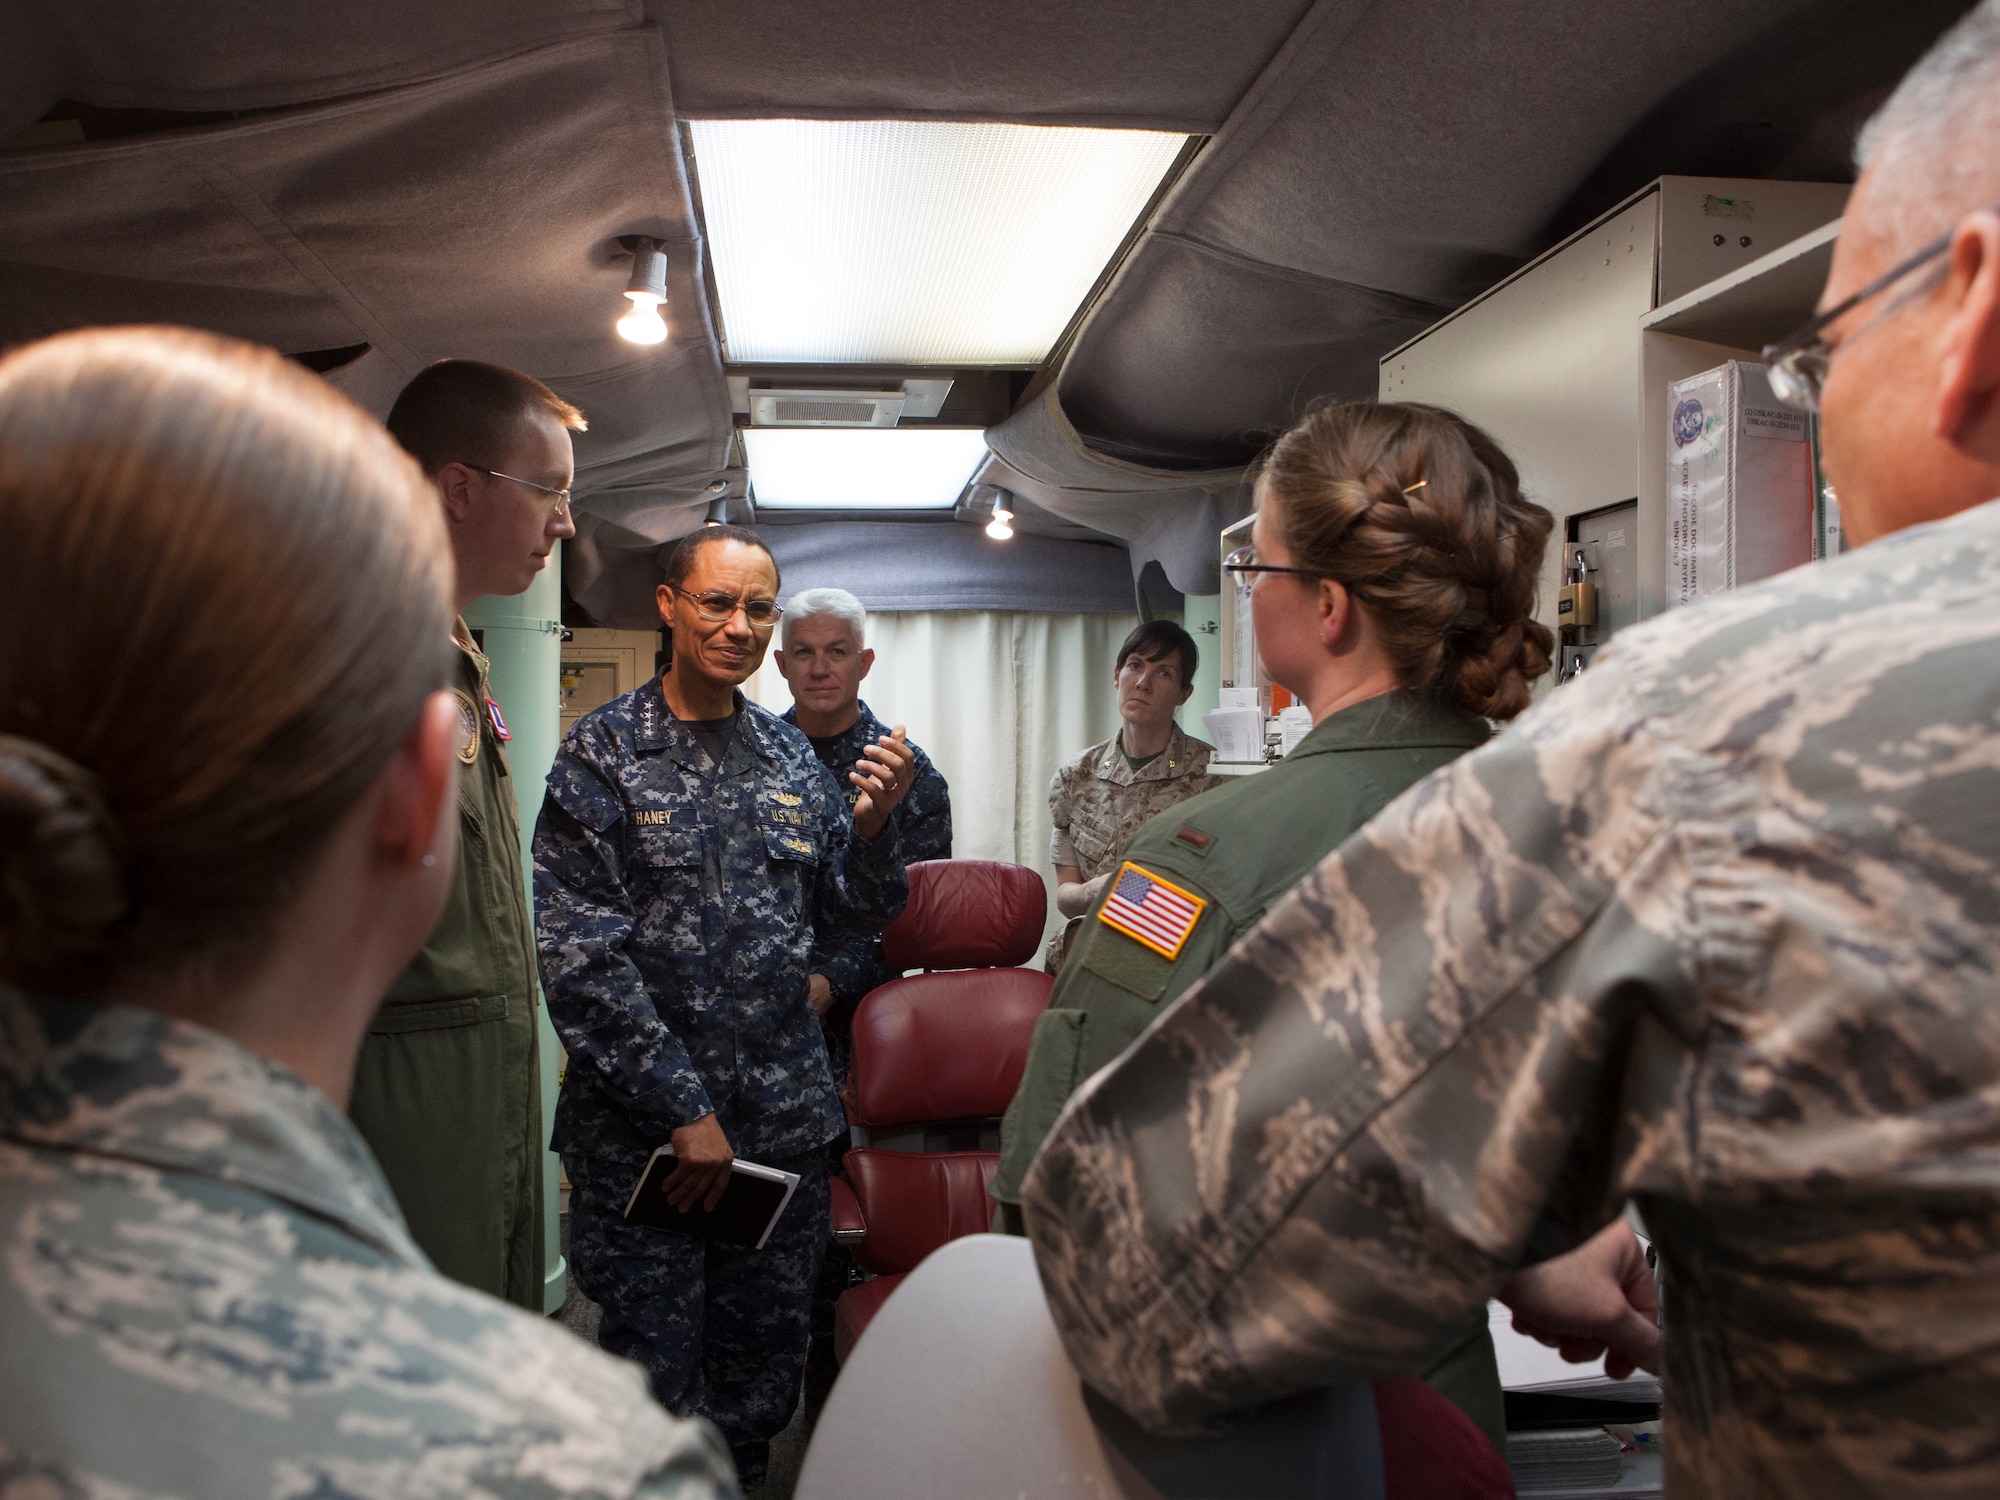 U.S. Navy Adm. Cecil D. Haney, U.S. Strategic Command commander, discusses missile operations while at launch control center in Nebraska, during his visit with Airmen from F.E. Warren Air Force Base, Wyo., April 27, 2015. Haney traveled to F.E. Warren to see firsthand the men and women performing the ICBM mission 24/7, 365, and to chair the Intercontinental Ballistic Missile Stakeholders meeting, one of several such meetings that will be held this year. USSTRATCOM is one of nine DoD unified combatant commands and is charged with strategic deterrence; space operations; cyberspace operations; joint electronic warfare; global strike; missile defense; intelligence, surveillance and reconnaissance; combating weapons of mass destruction; and analysis and targeting. (U.S. Air Force photo by Lan Kim)